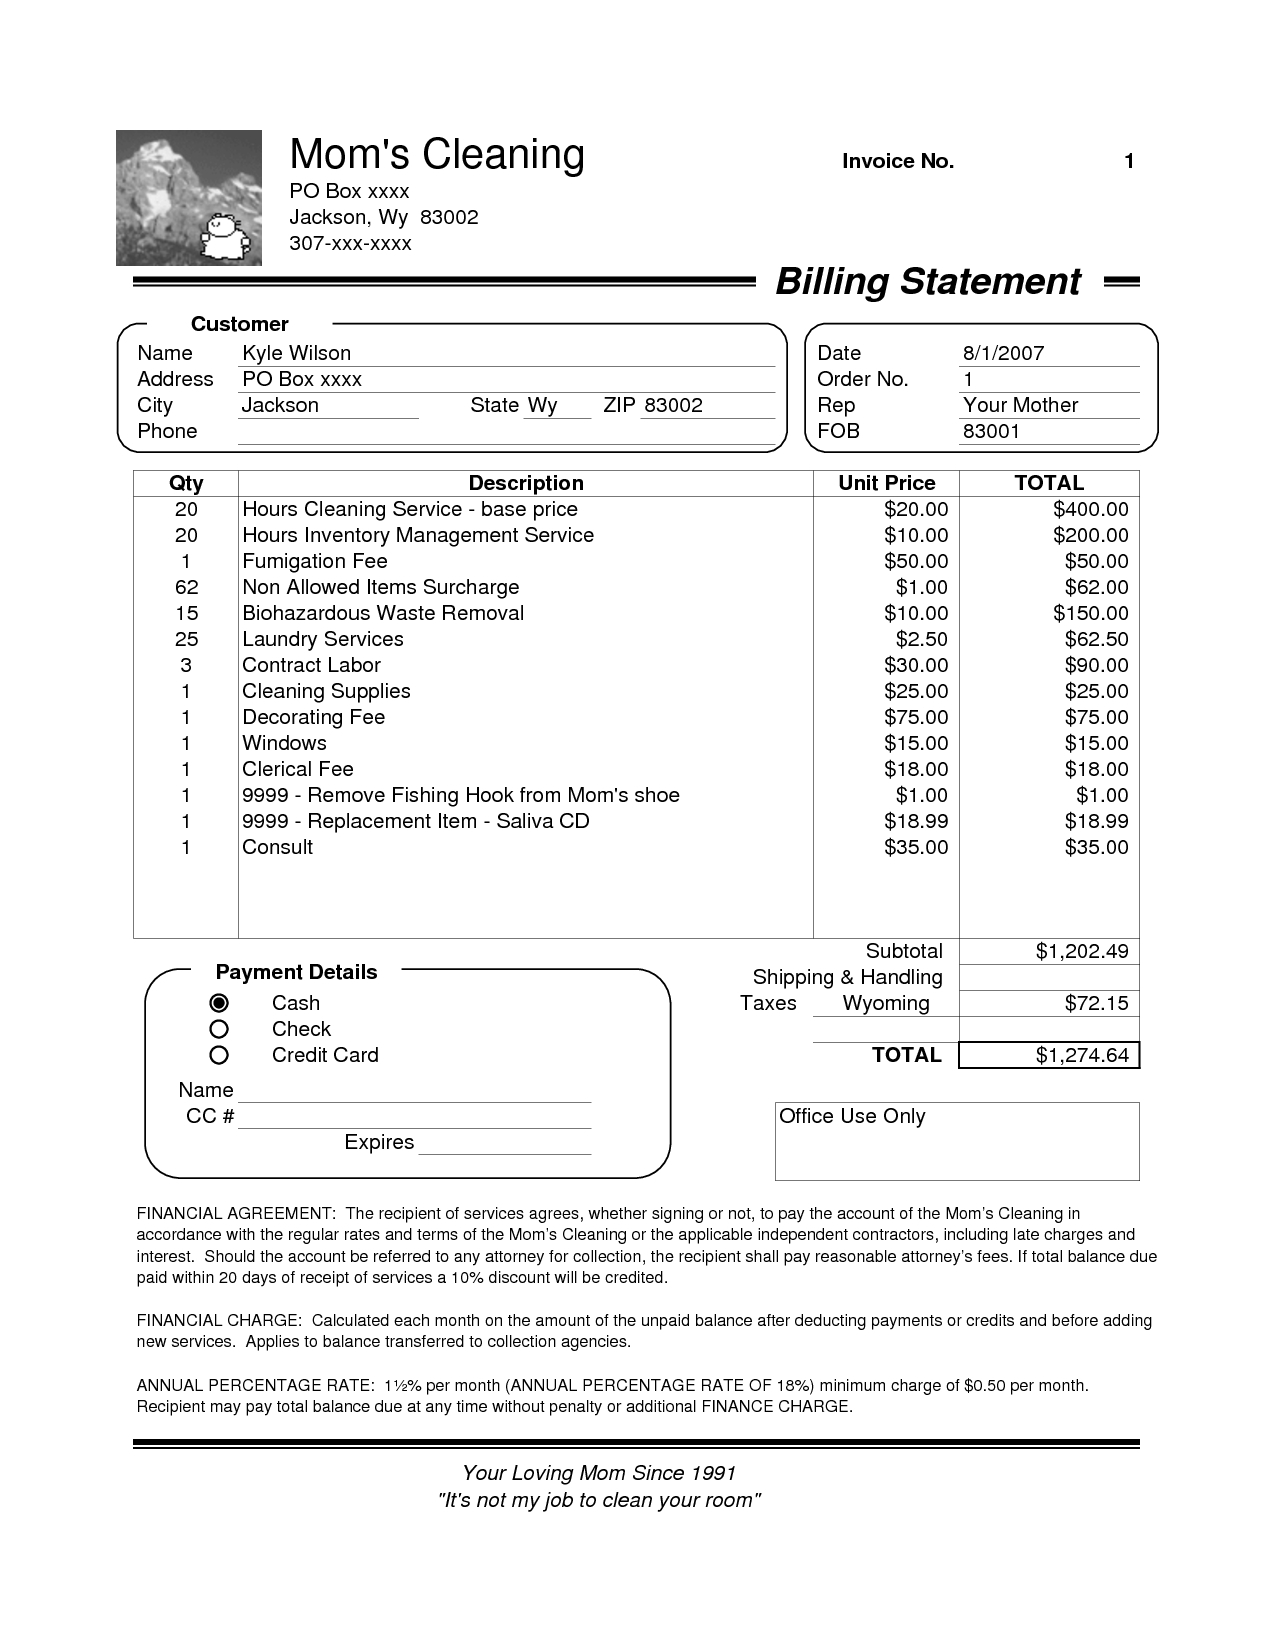 sample cleaning invoice invoice template ideas cleaning invoice sample